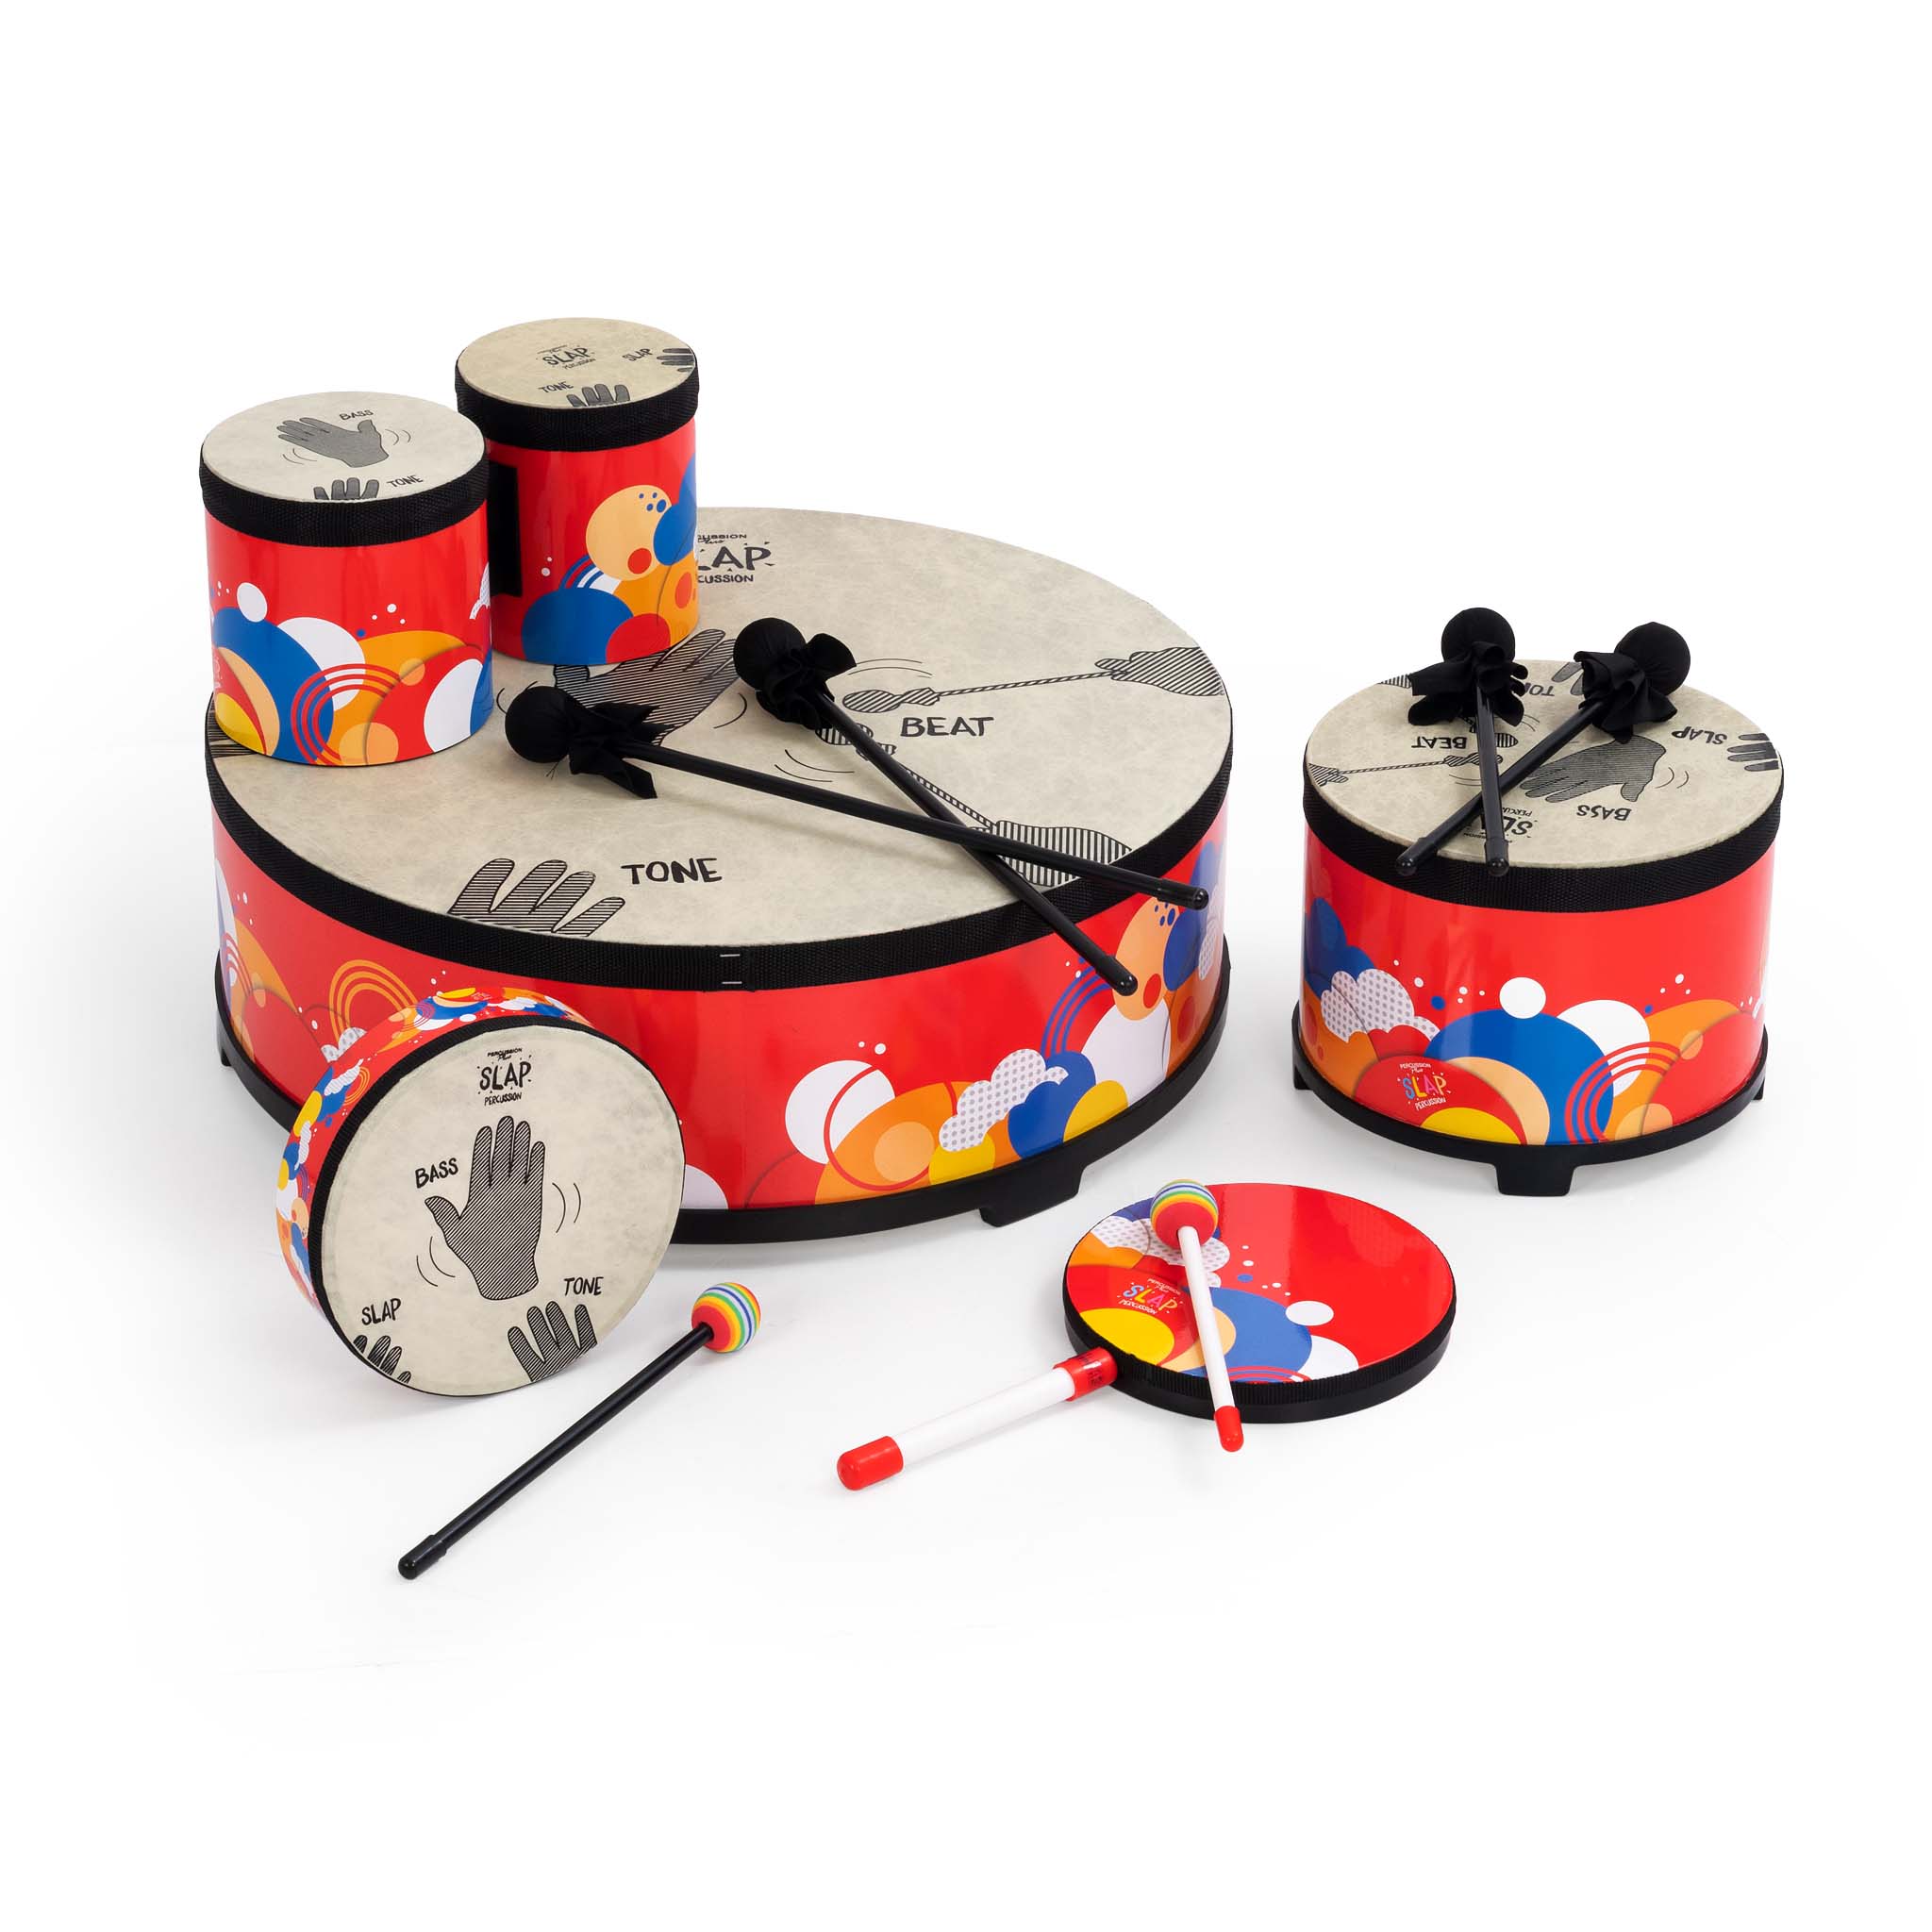 Slap Percussion - pack of 5 drums, The new Slap Drumming range from Percussion Plus is the perfect way to introduce rhythm and time into your music classes and sessions. Whether it's for a large primary school class, sessions at a local music centre or music therapy for any age, the Slap Drumming range gives you the tools you need for smooth running lessons at any ability level. Every drum from Percussion Plus produces a big, booming sound and is lots of fun for anyone aged 5+. All materials and hardware ha